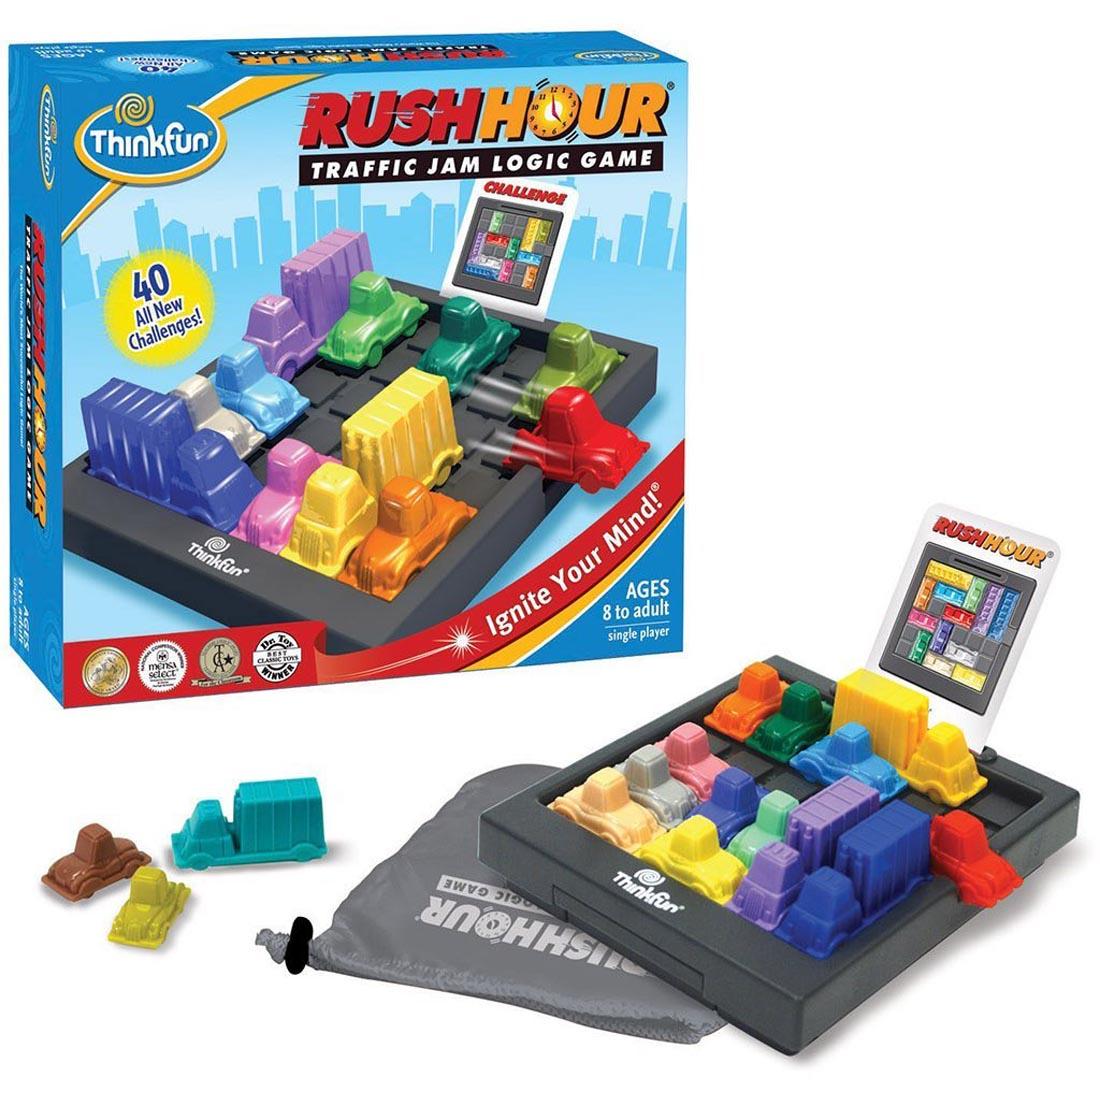 Thinkfun Rush Hour Traffic Jam Puzzle shown both in and out of package